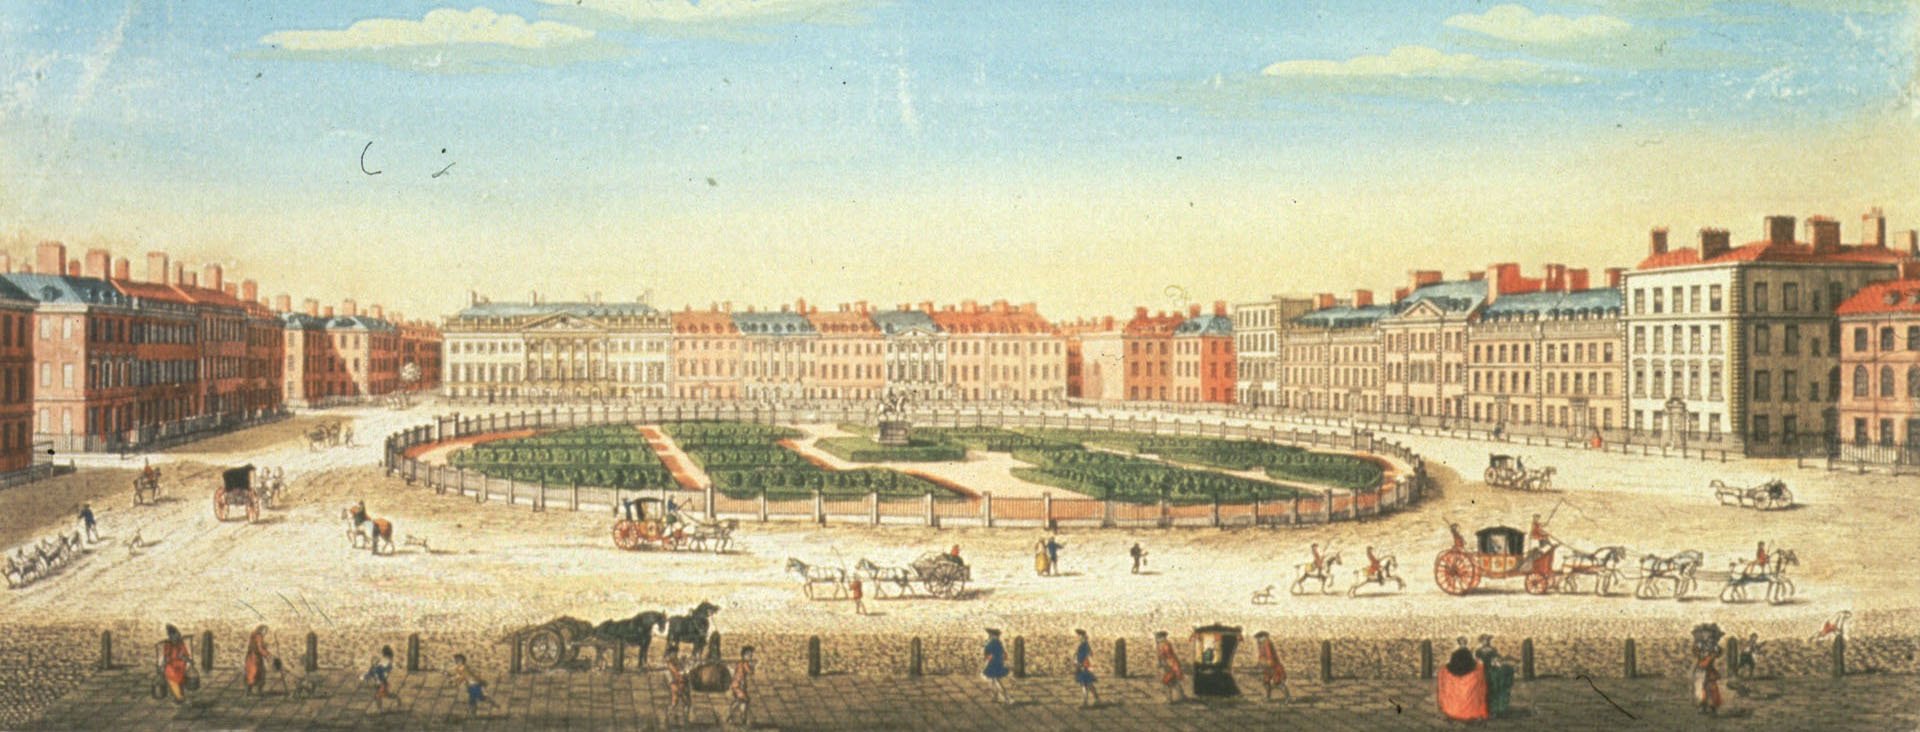 The 1720s and the development of Mayfair 